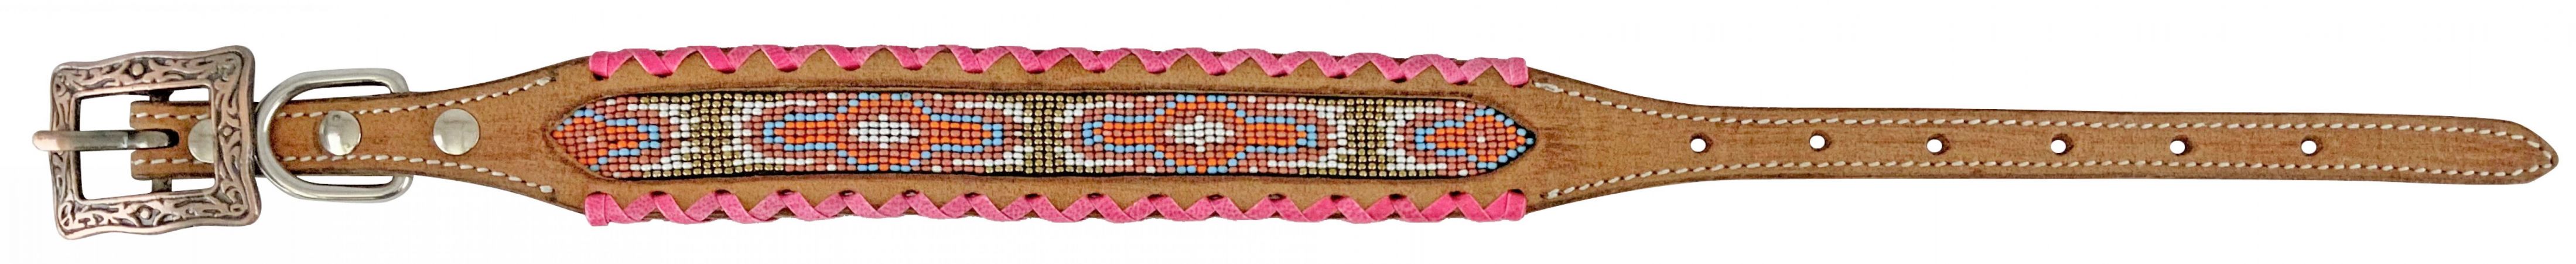 Showman Couture Genuine leather dog collar with beaded inlay - pink whipstitching